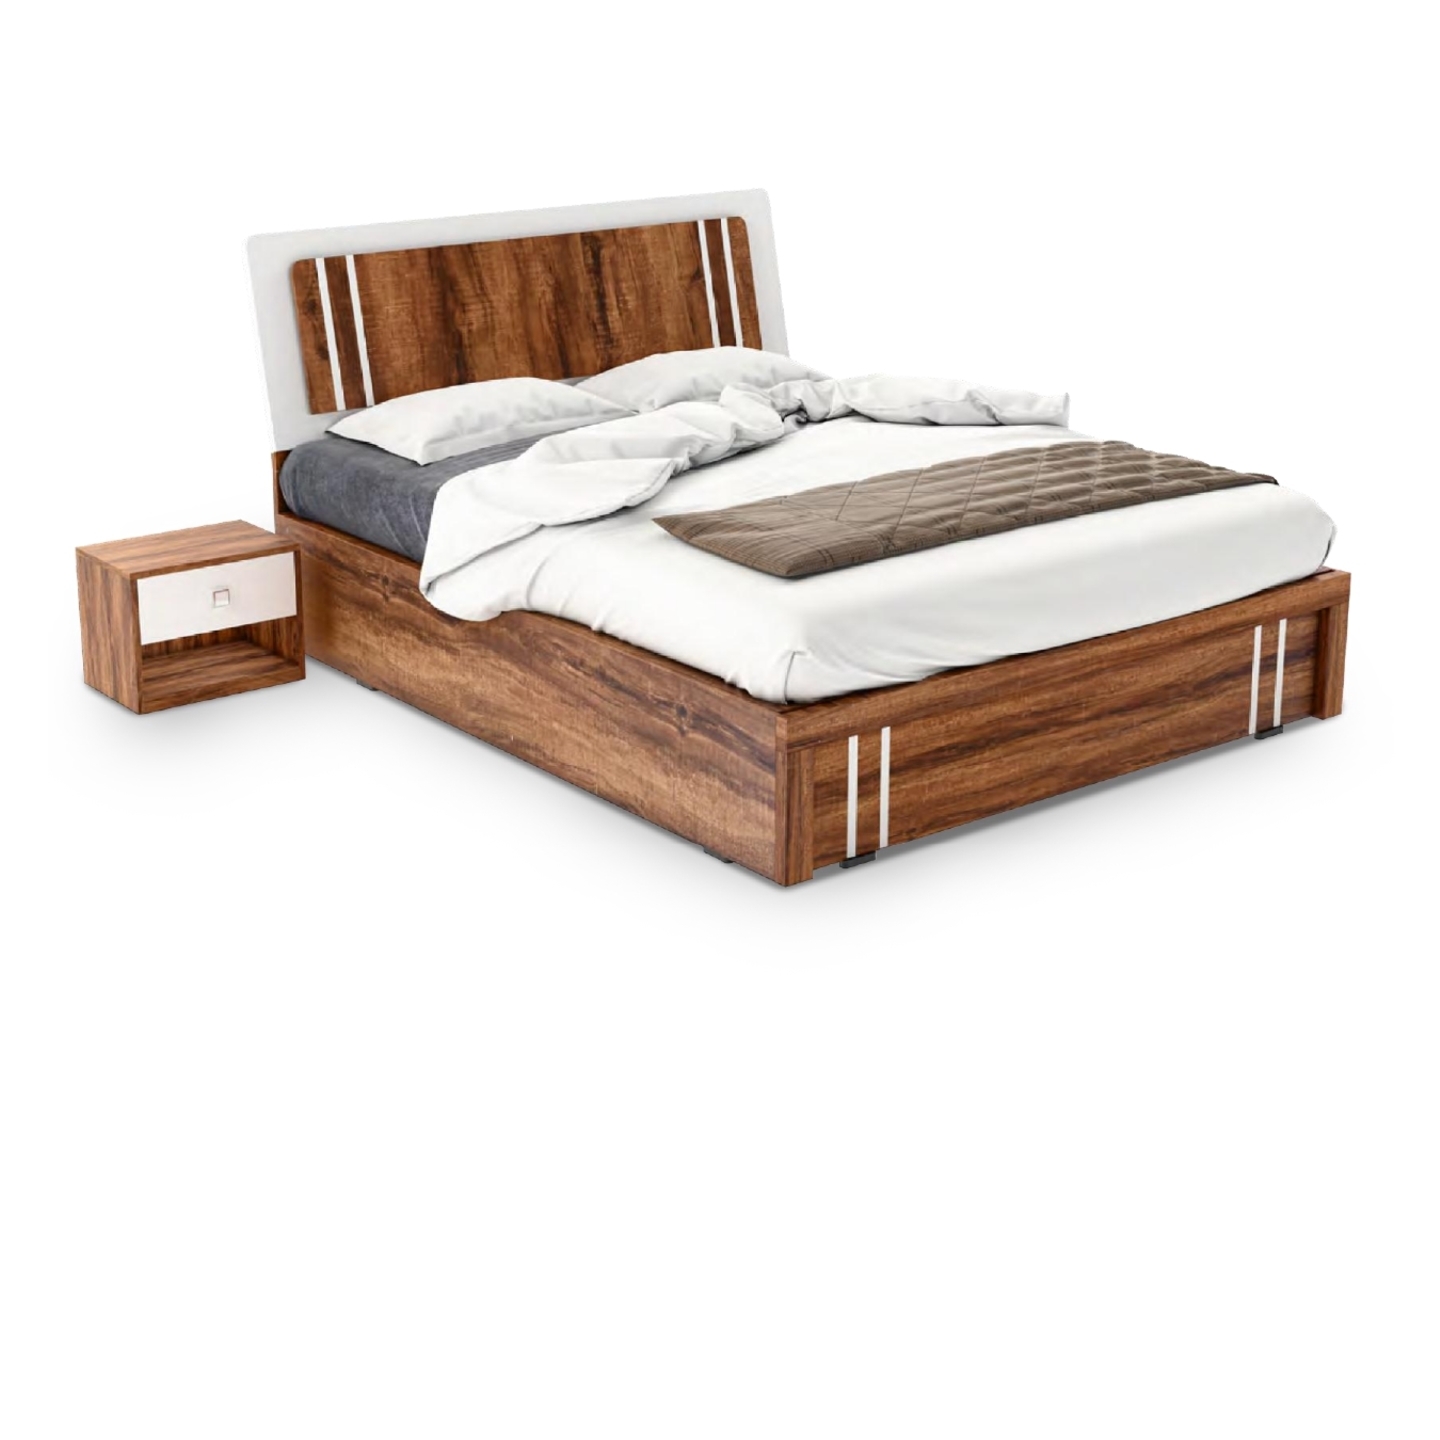 RLF Queen Size Bed 78"x60" Revine In Brown Colour